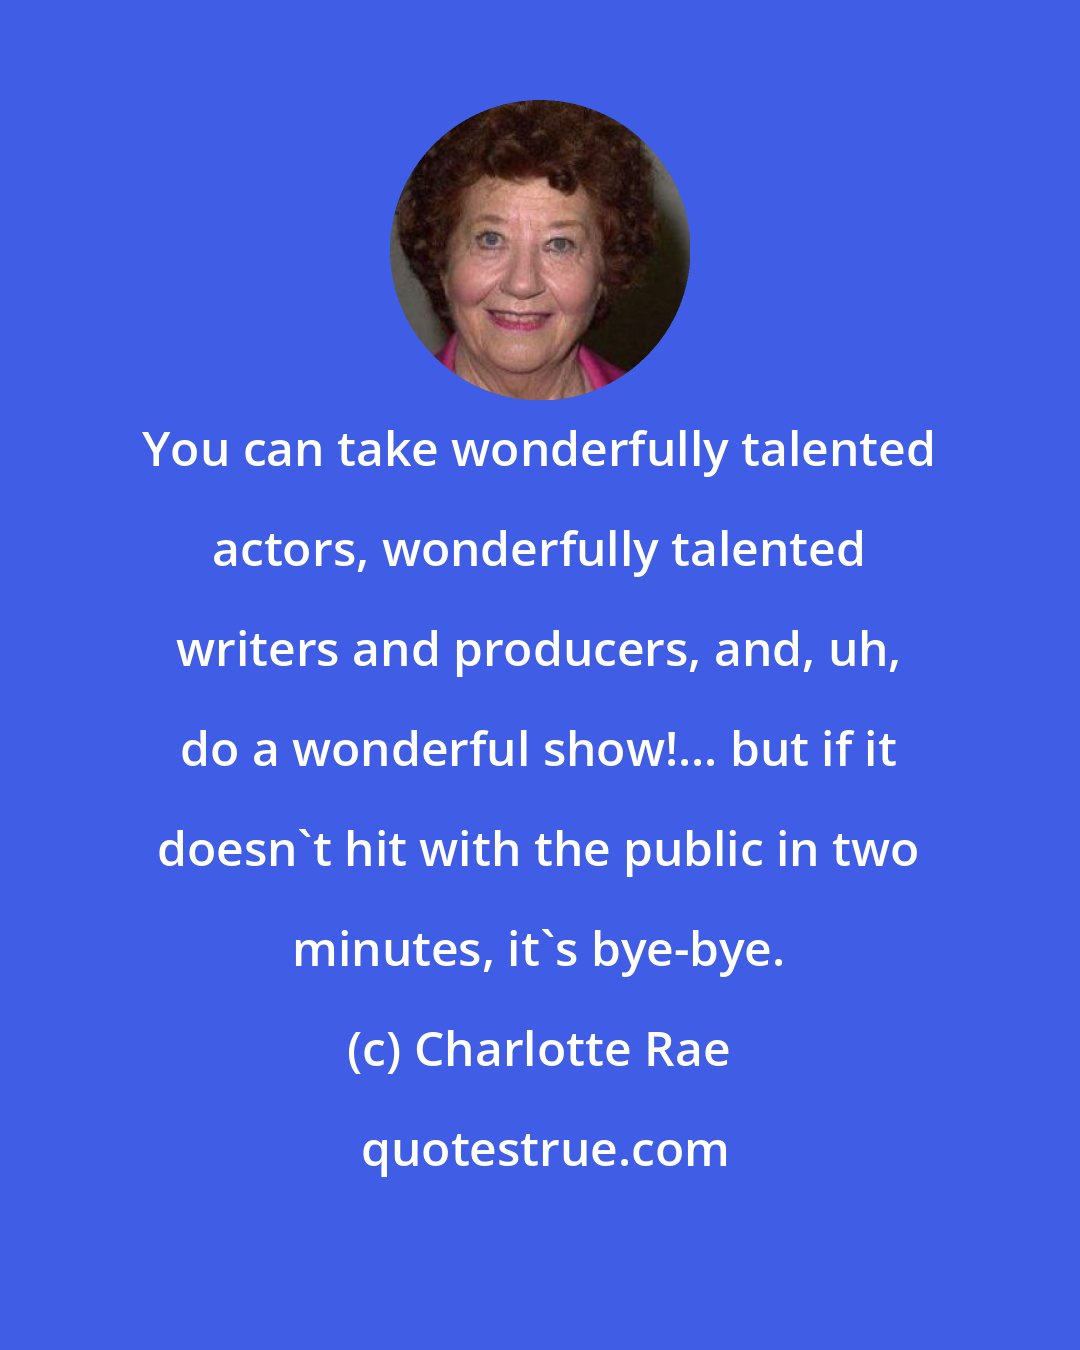 Charlotte Rae: You can take wonderfully talented actors, wonderfully talented writers and producers, and, uh, do a wonderful show!... but if it doesn't hit with the public in two minutes, it's bye-bye.